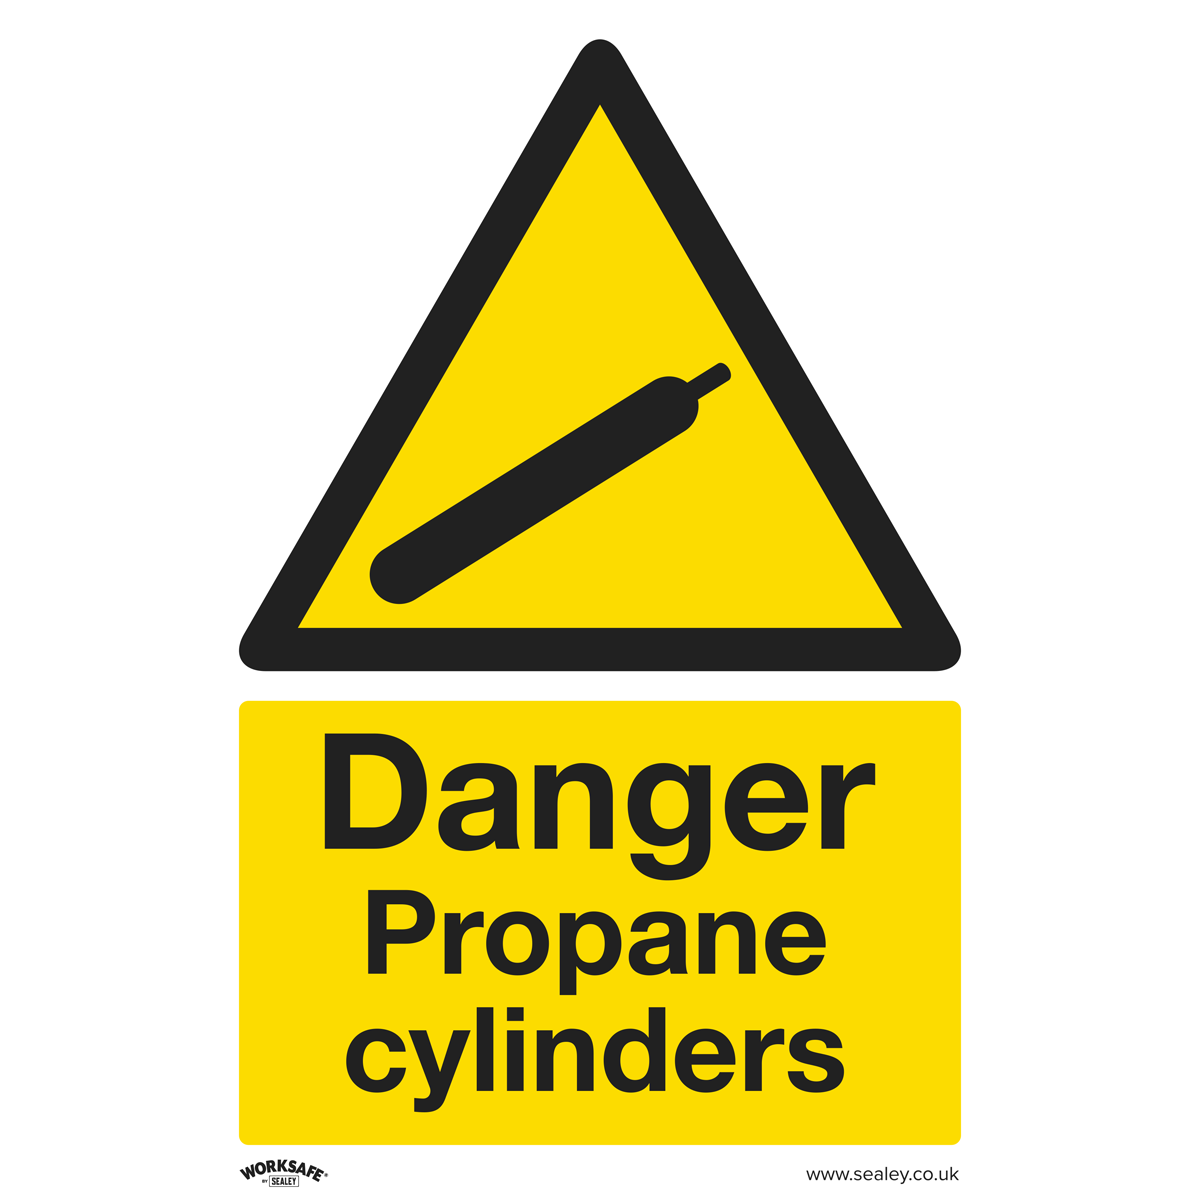 Sealey Warning Safety Sign - Danger Propane Cylinders - Rigid Plastic - Pack of 10